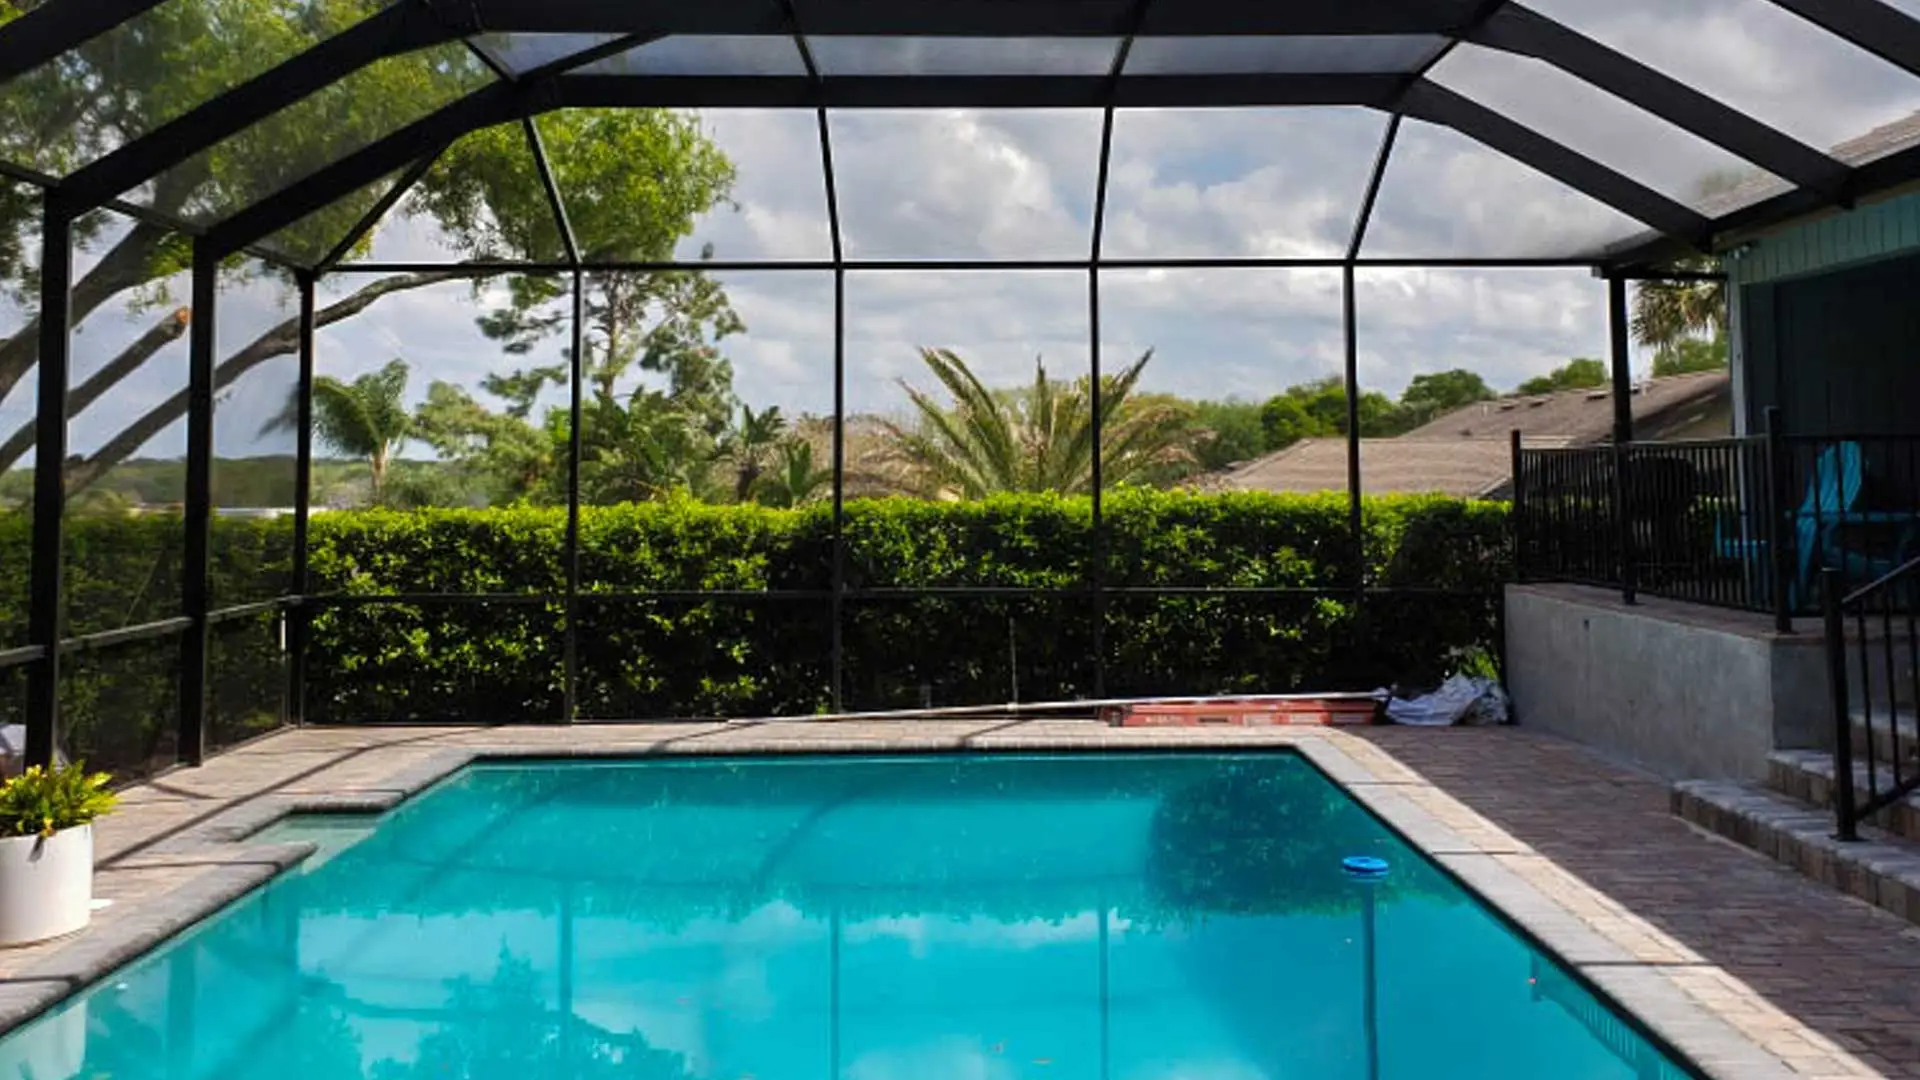 A new aluminum pool cage in the backyard of a property in Plant City, FL.